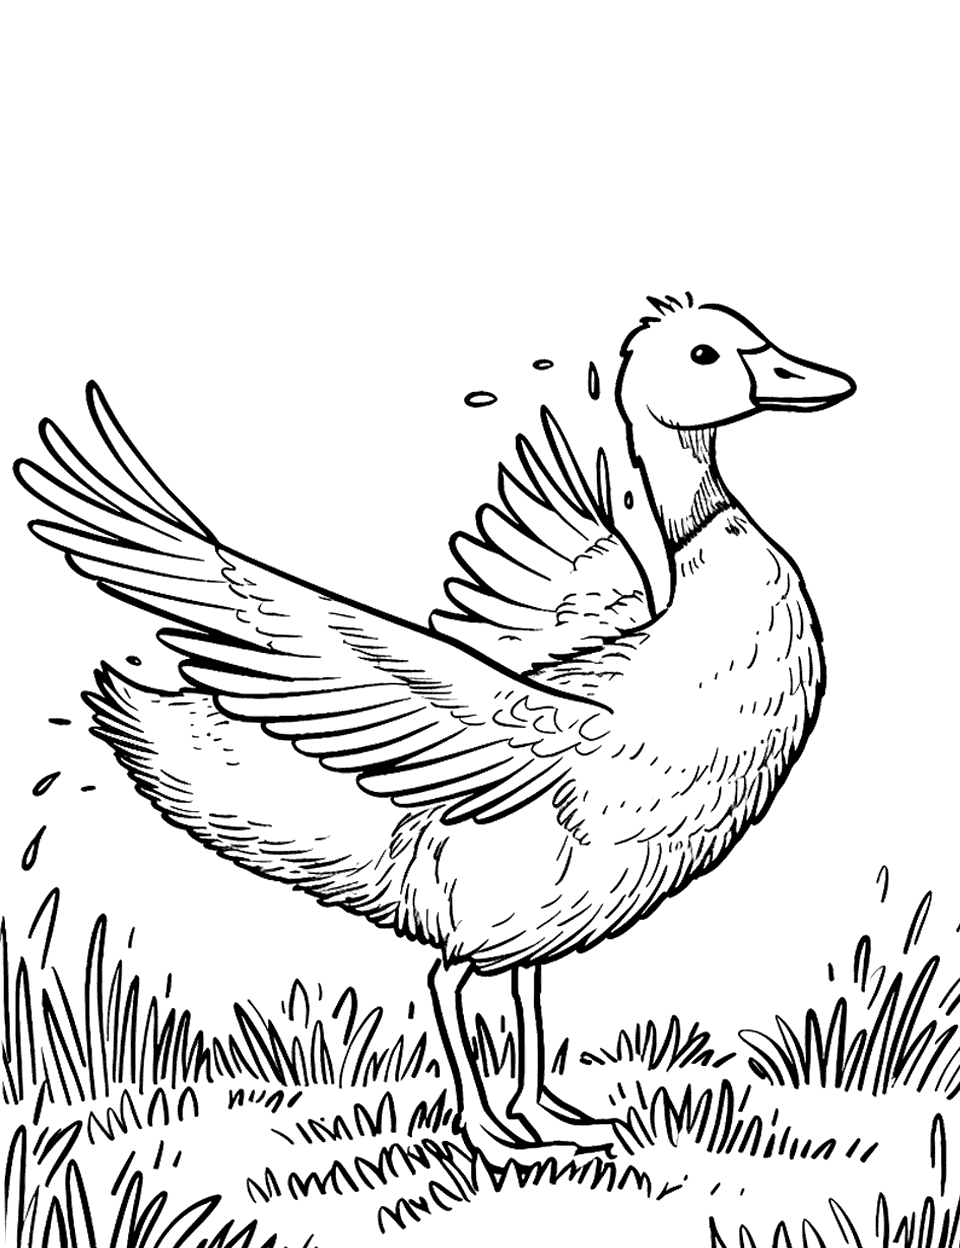 Goose Flapping Wings Farm Animal Coloring Page - A goose flapping its wings as if preparing to take off from a grassy area.